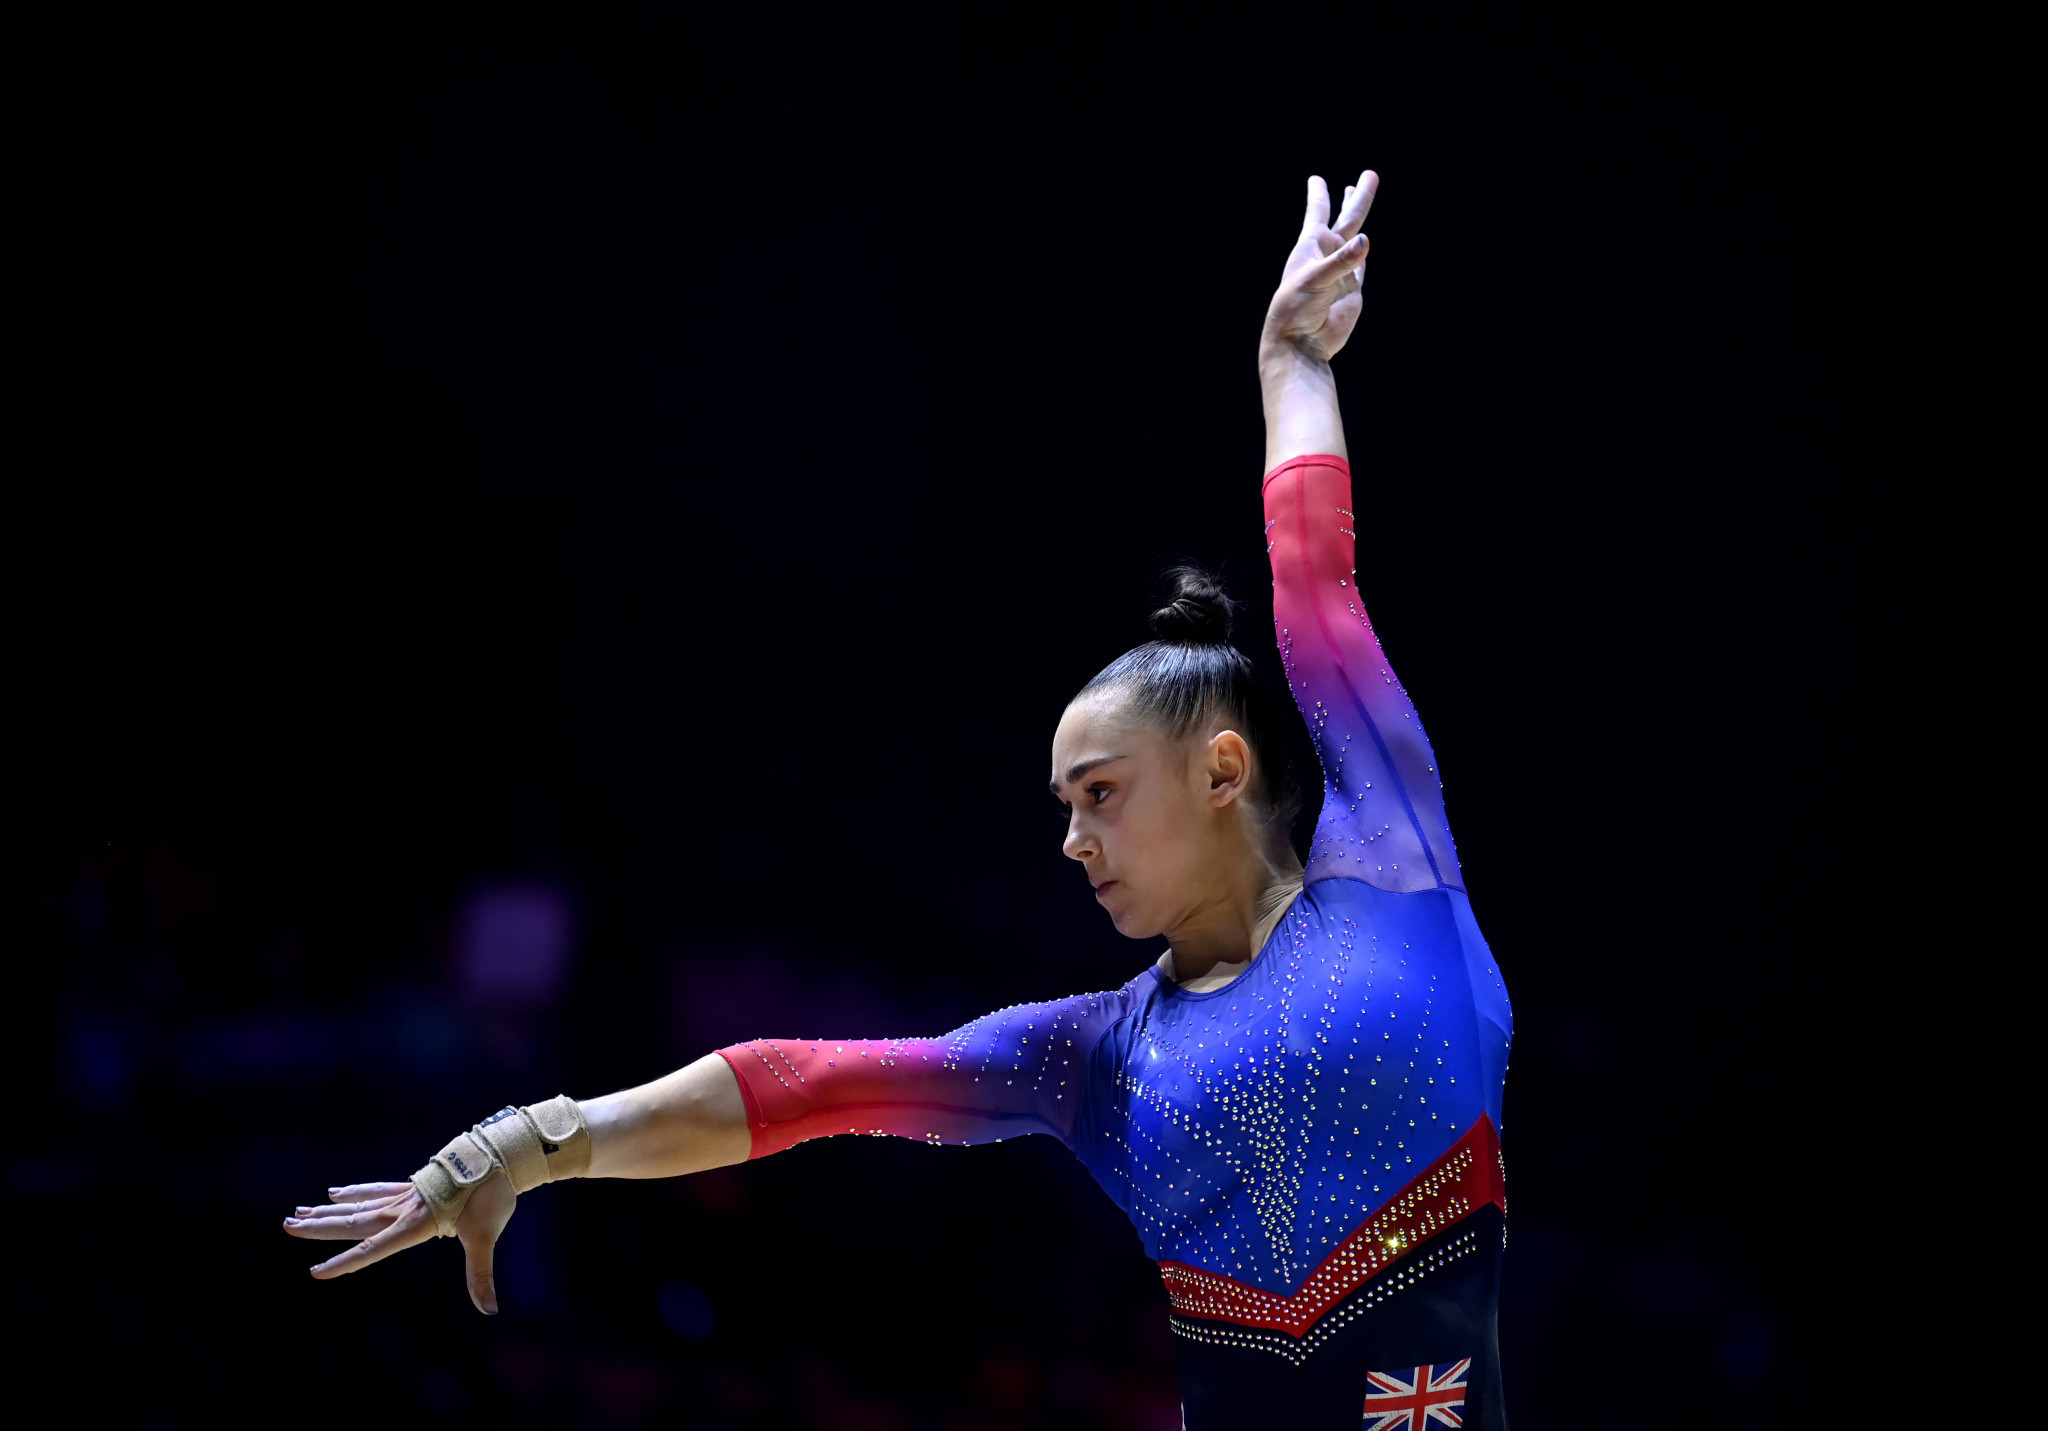 Britain's Jessica Gadirova in the floor exercise is the only athlete defending her title in the women's apparatus events ©Getty Images